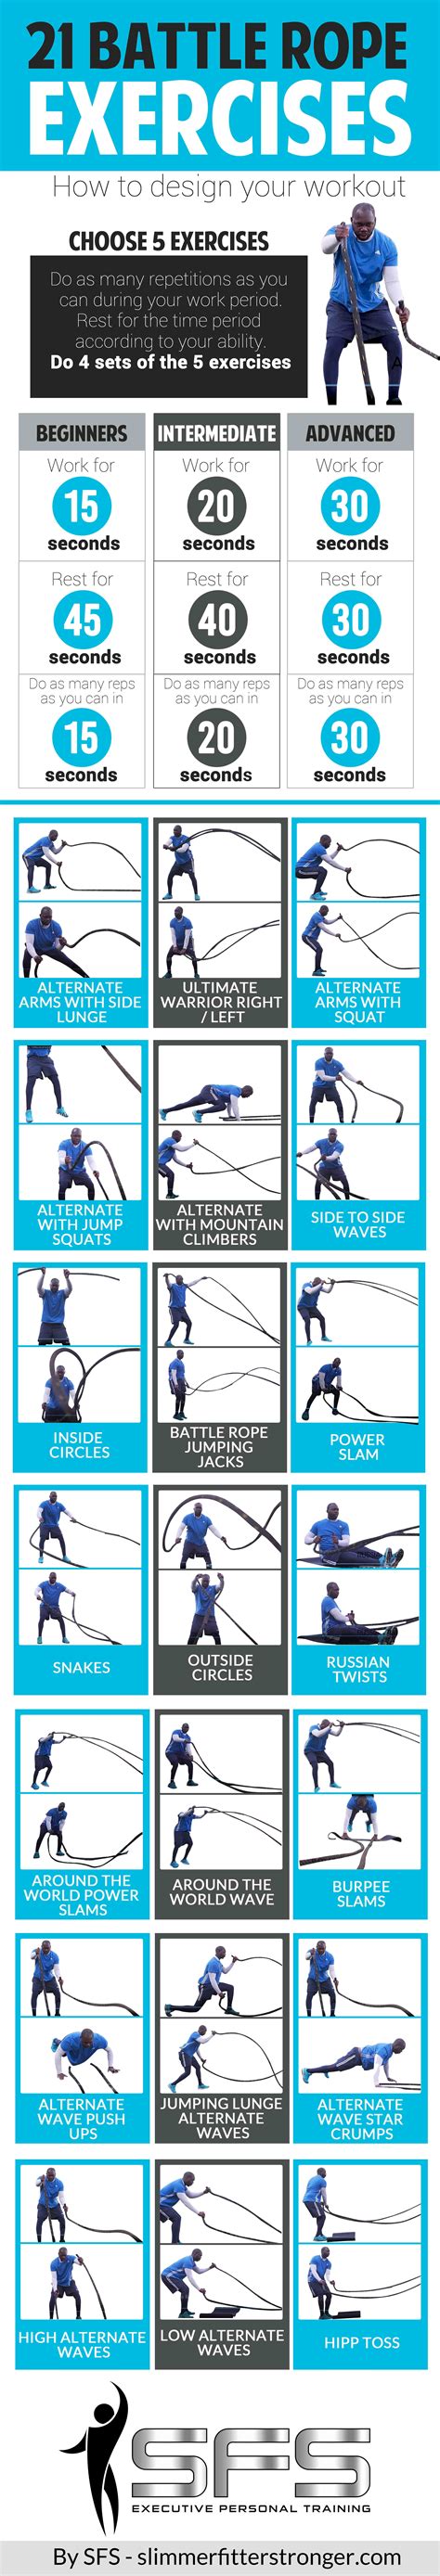 Battle Rope Hiit 4 Battle Rope Hiit Workouts And 21